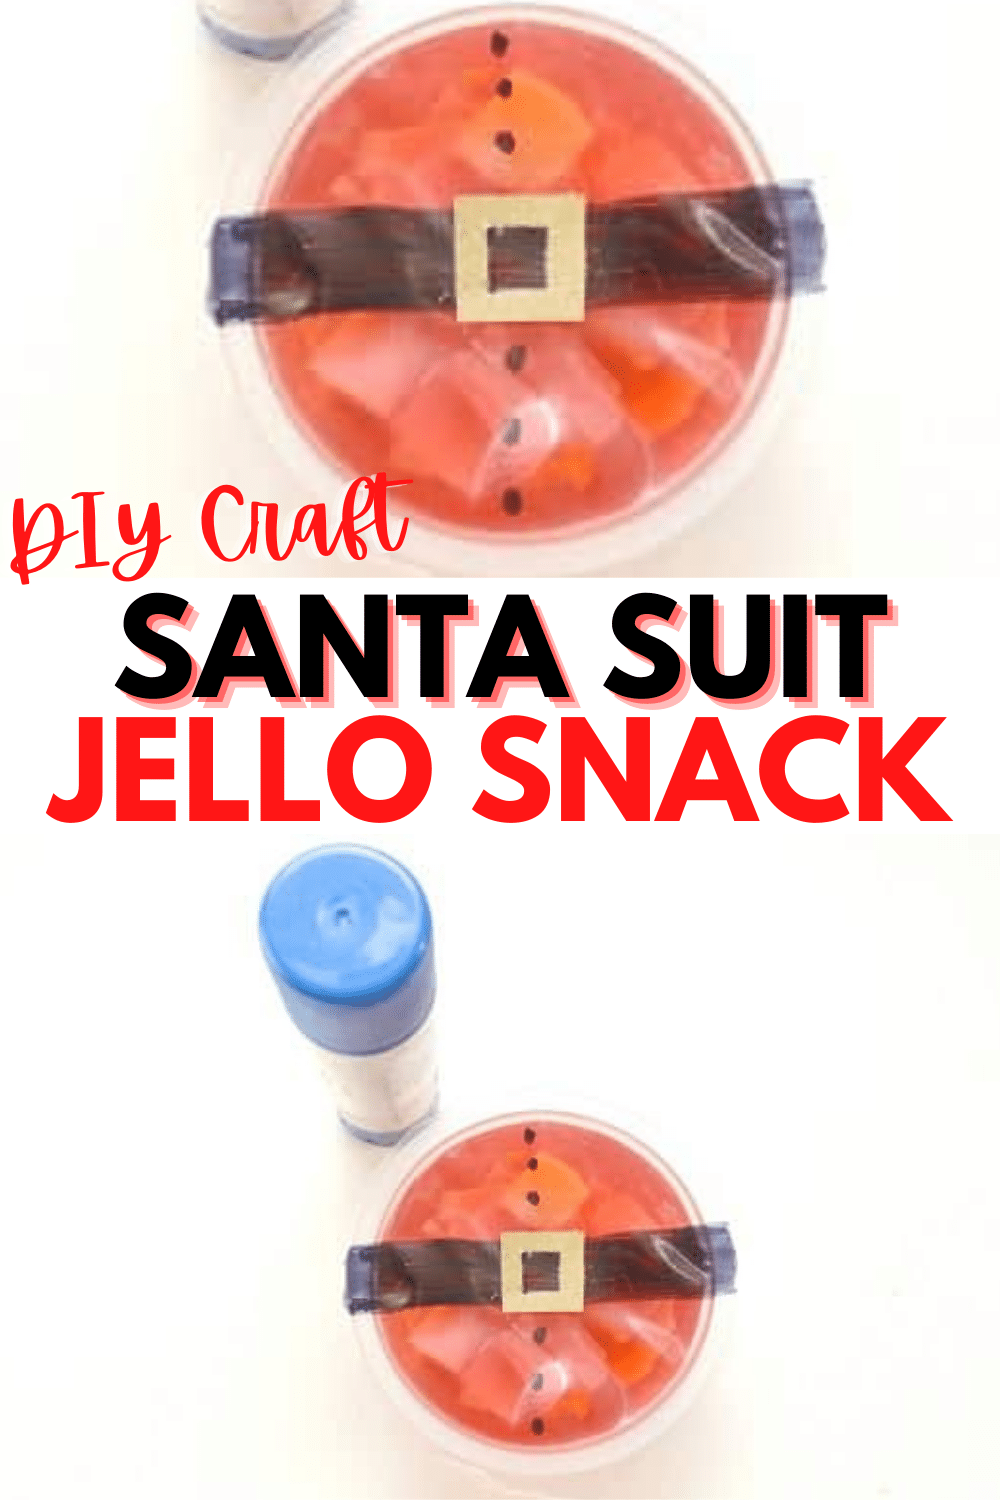 You just need a few minutes to transform your child's lunchbox dessert into a holiday surprise. Find out how to make this Santa Suit Jello Snack. #snack #lunchbox #forkids #santa via @wondermomwannab